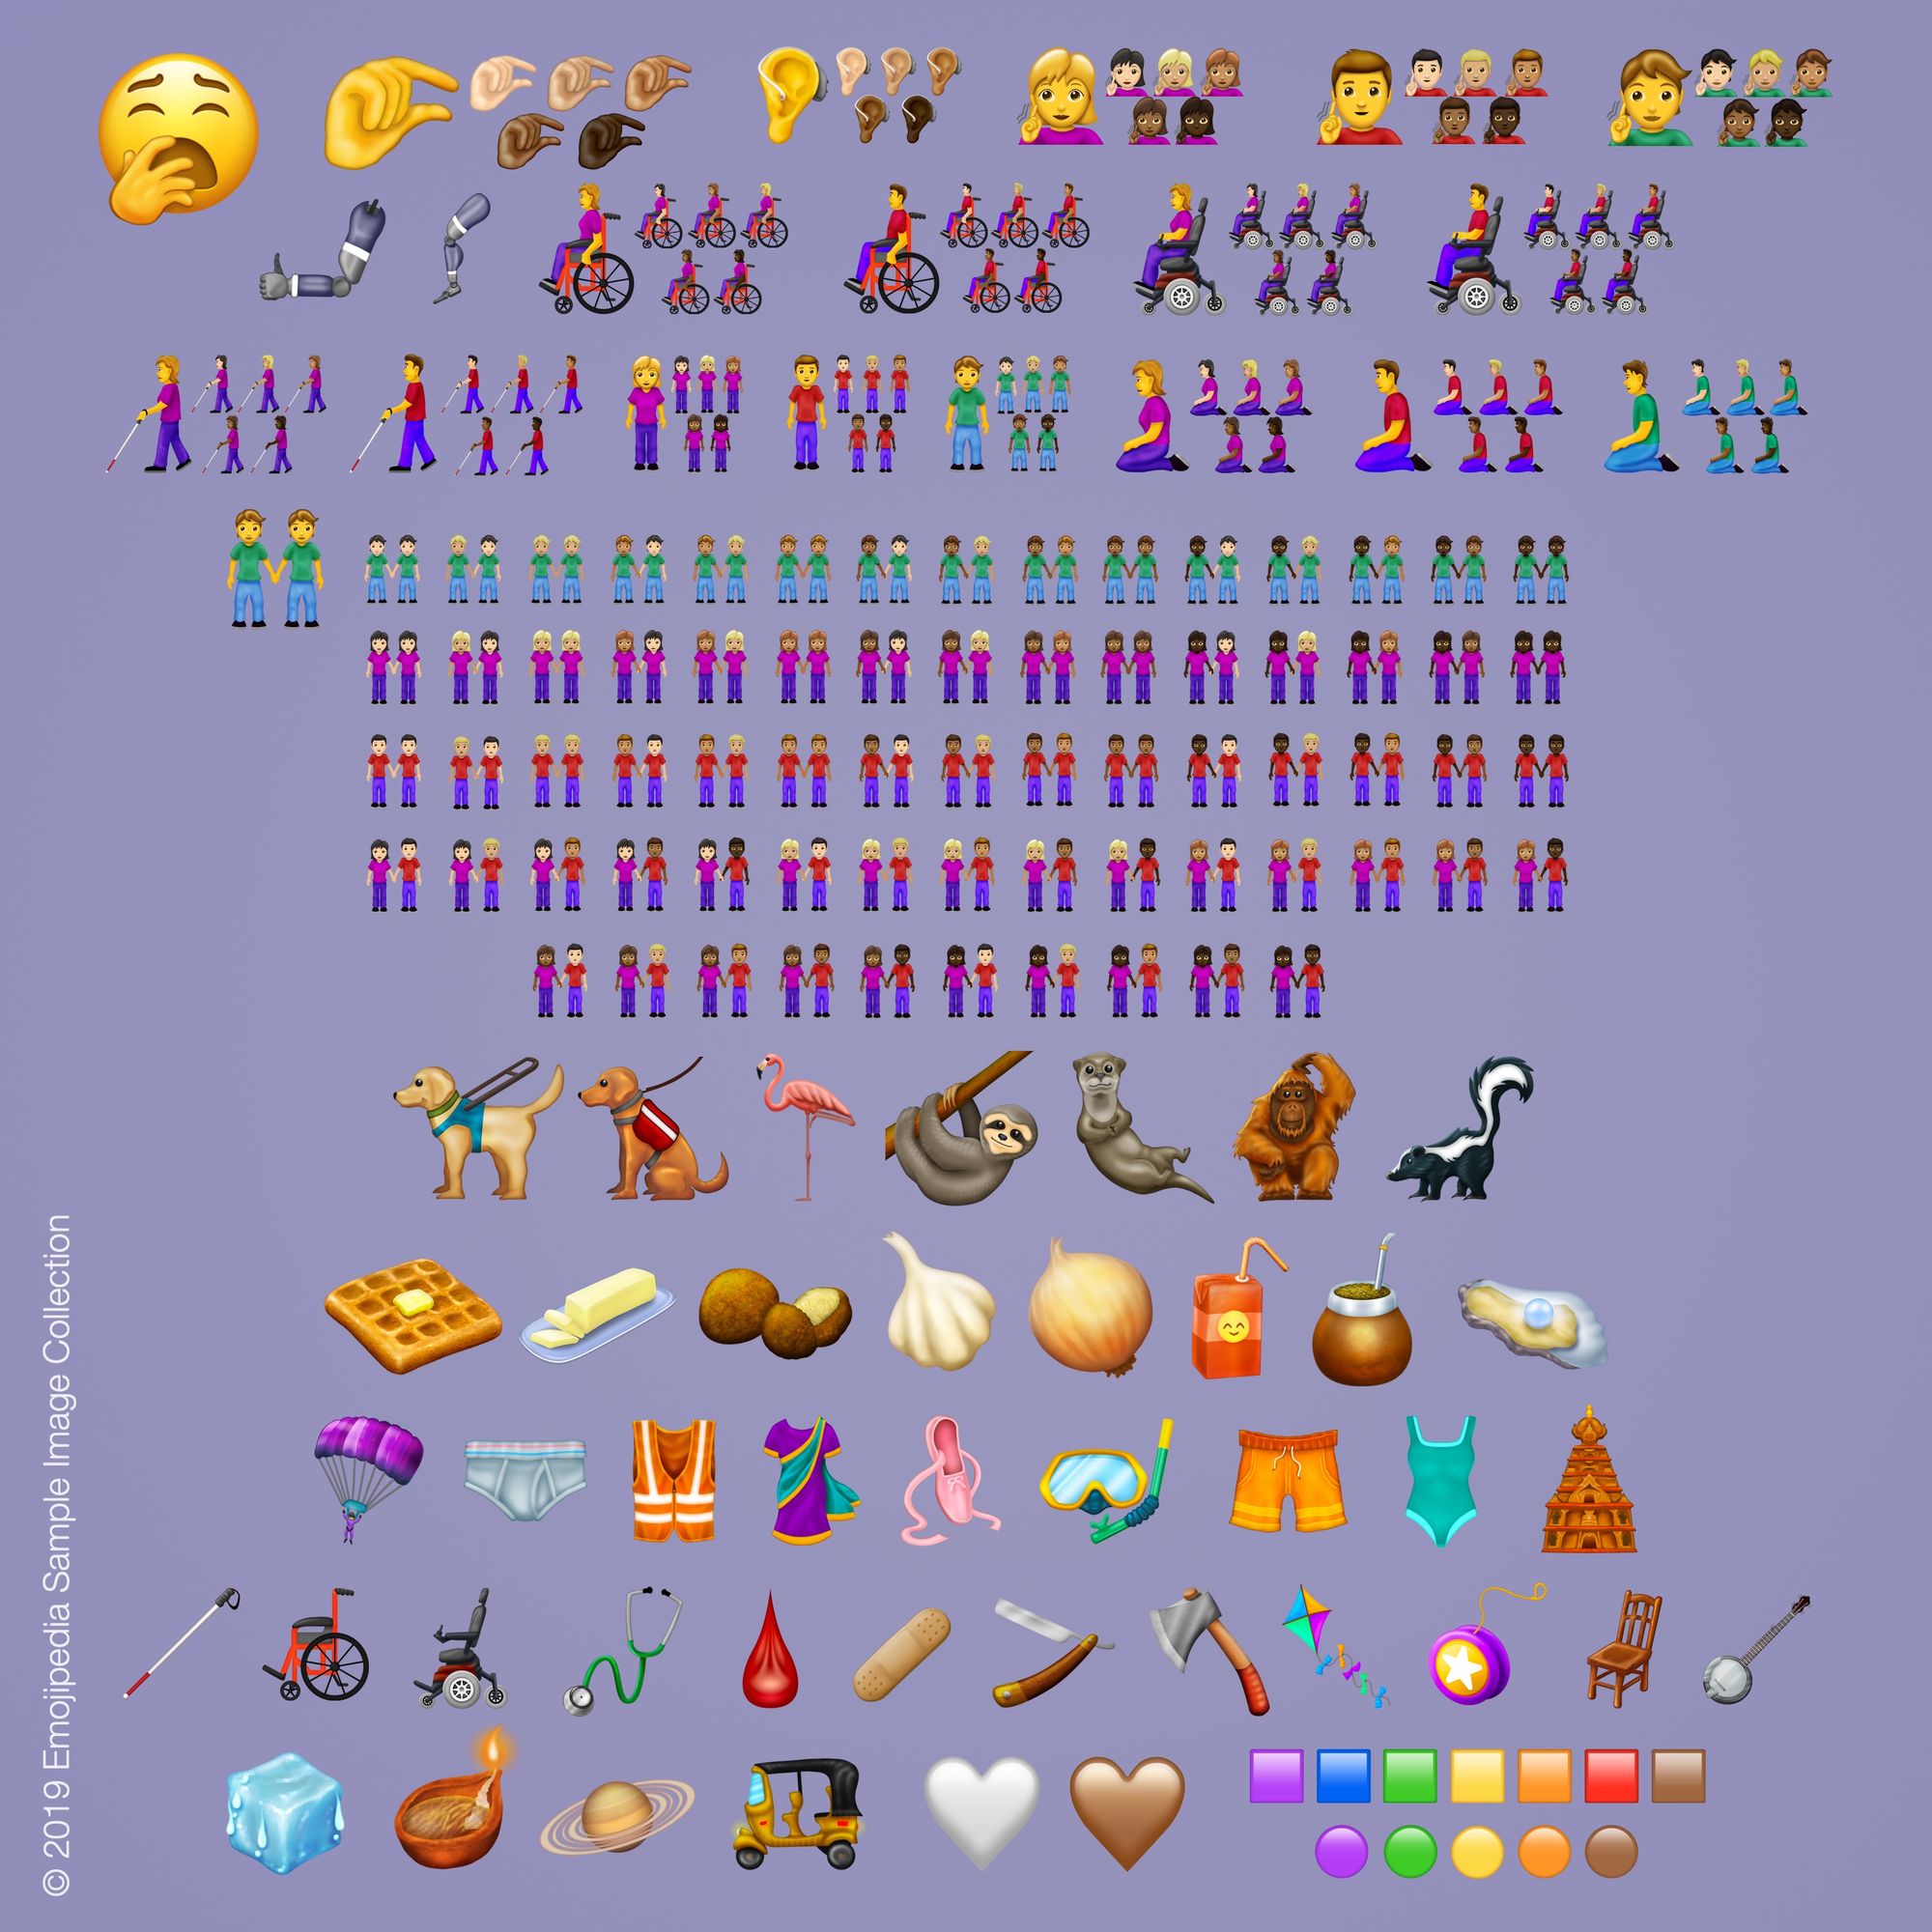 230 new emojis have now been approved by the Unicode Consortium.